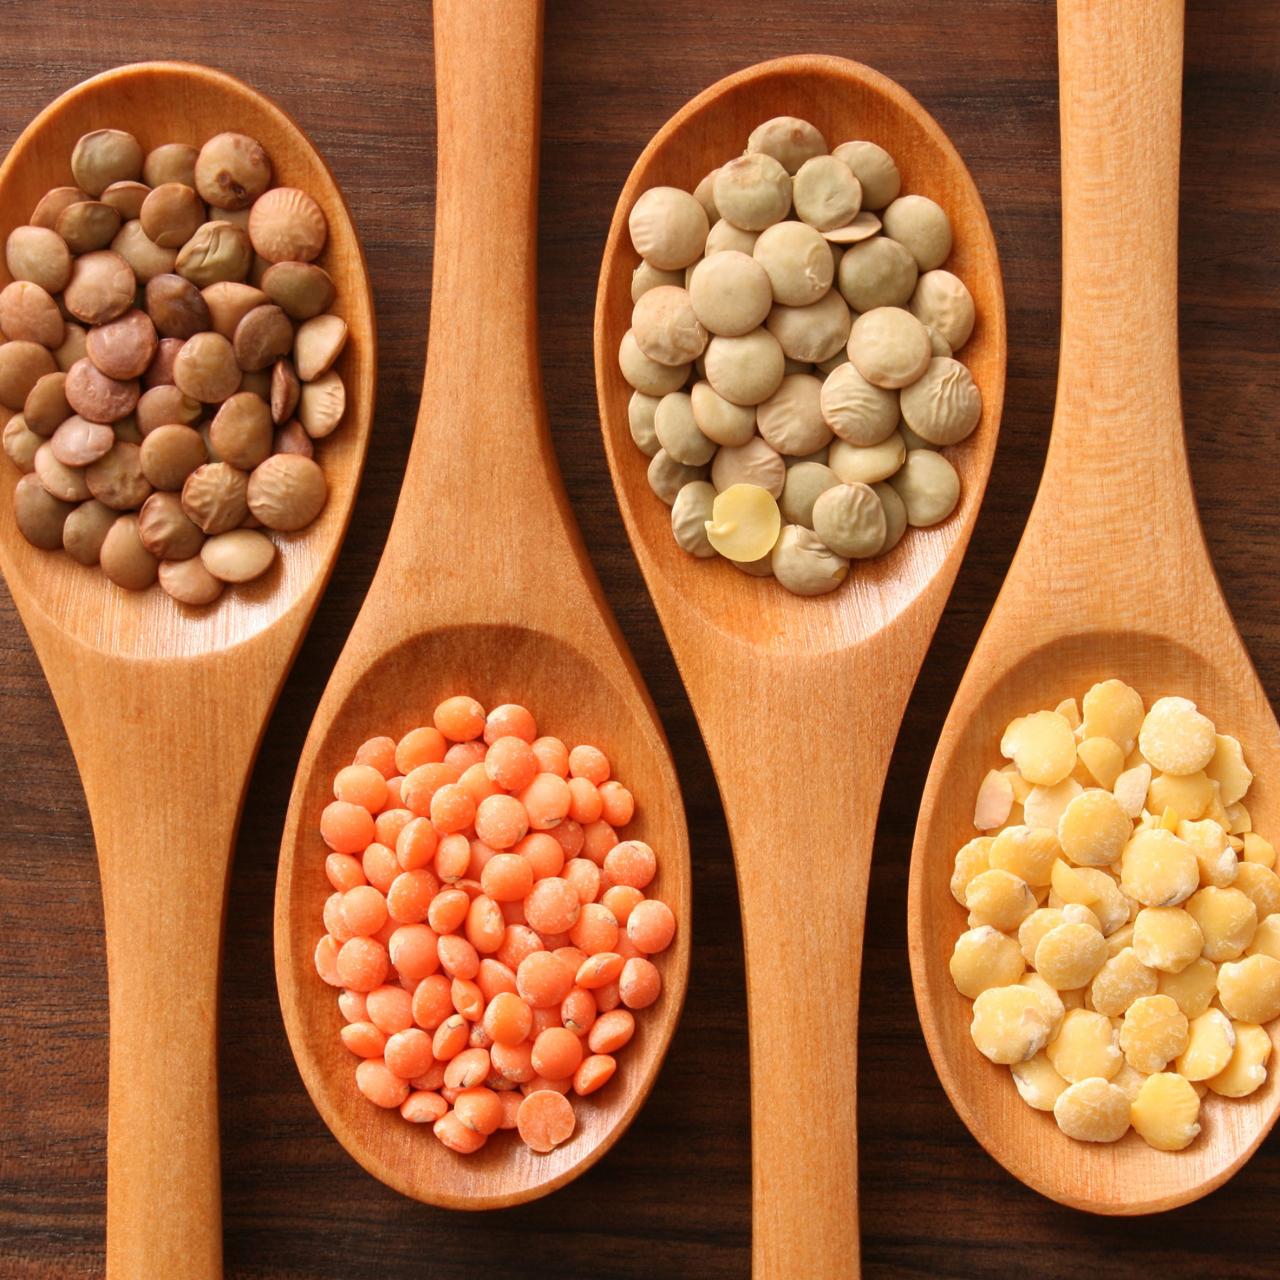 What Are Legumes?